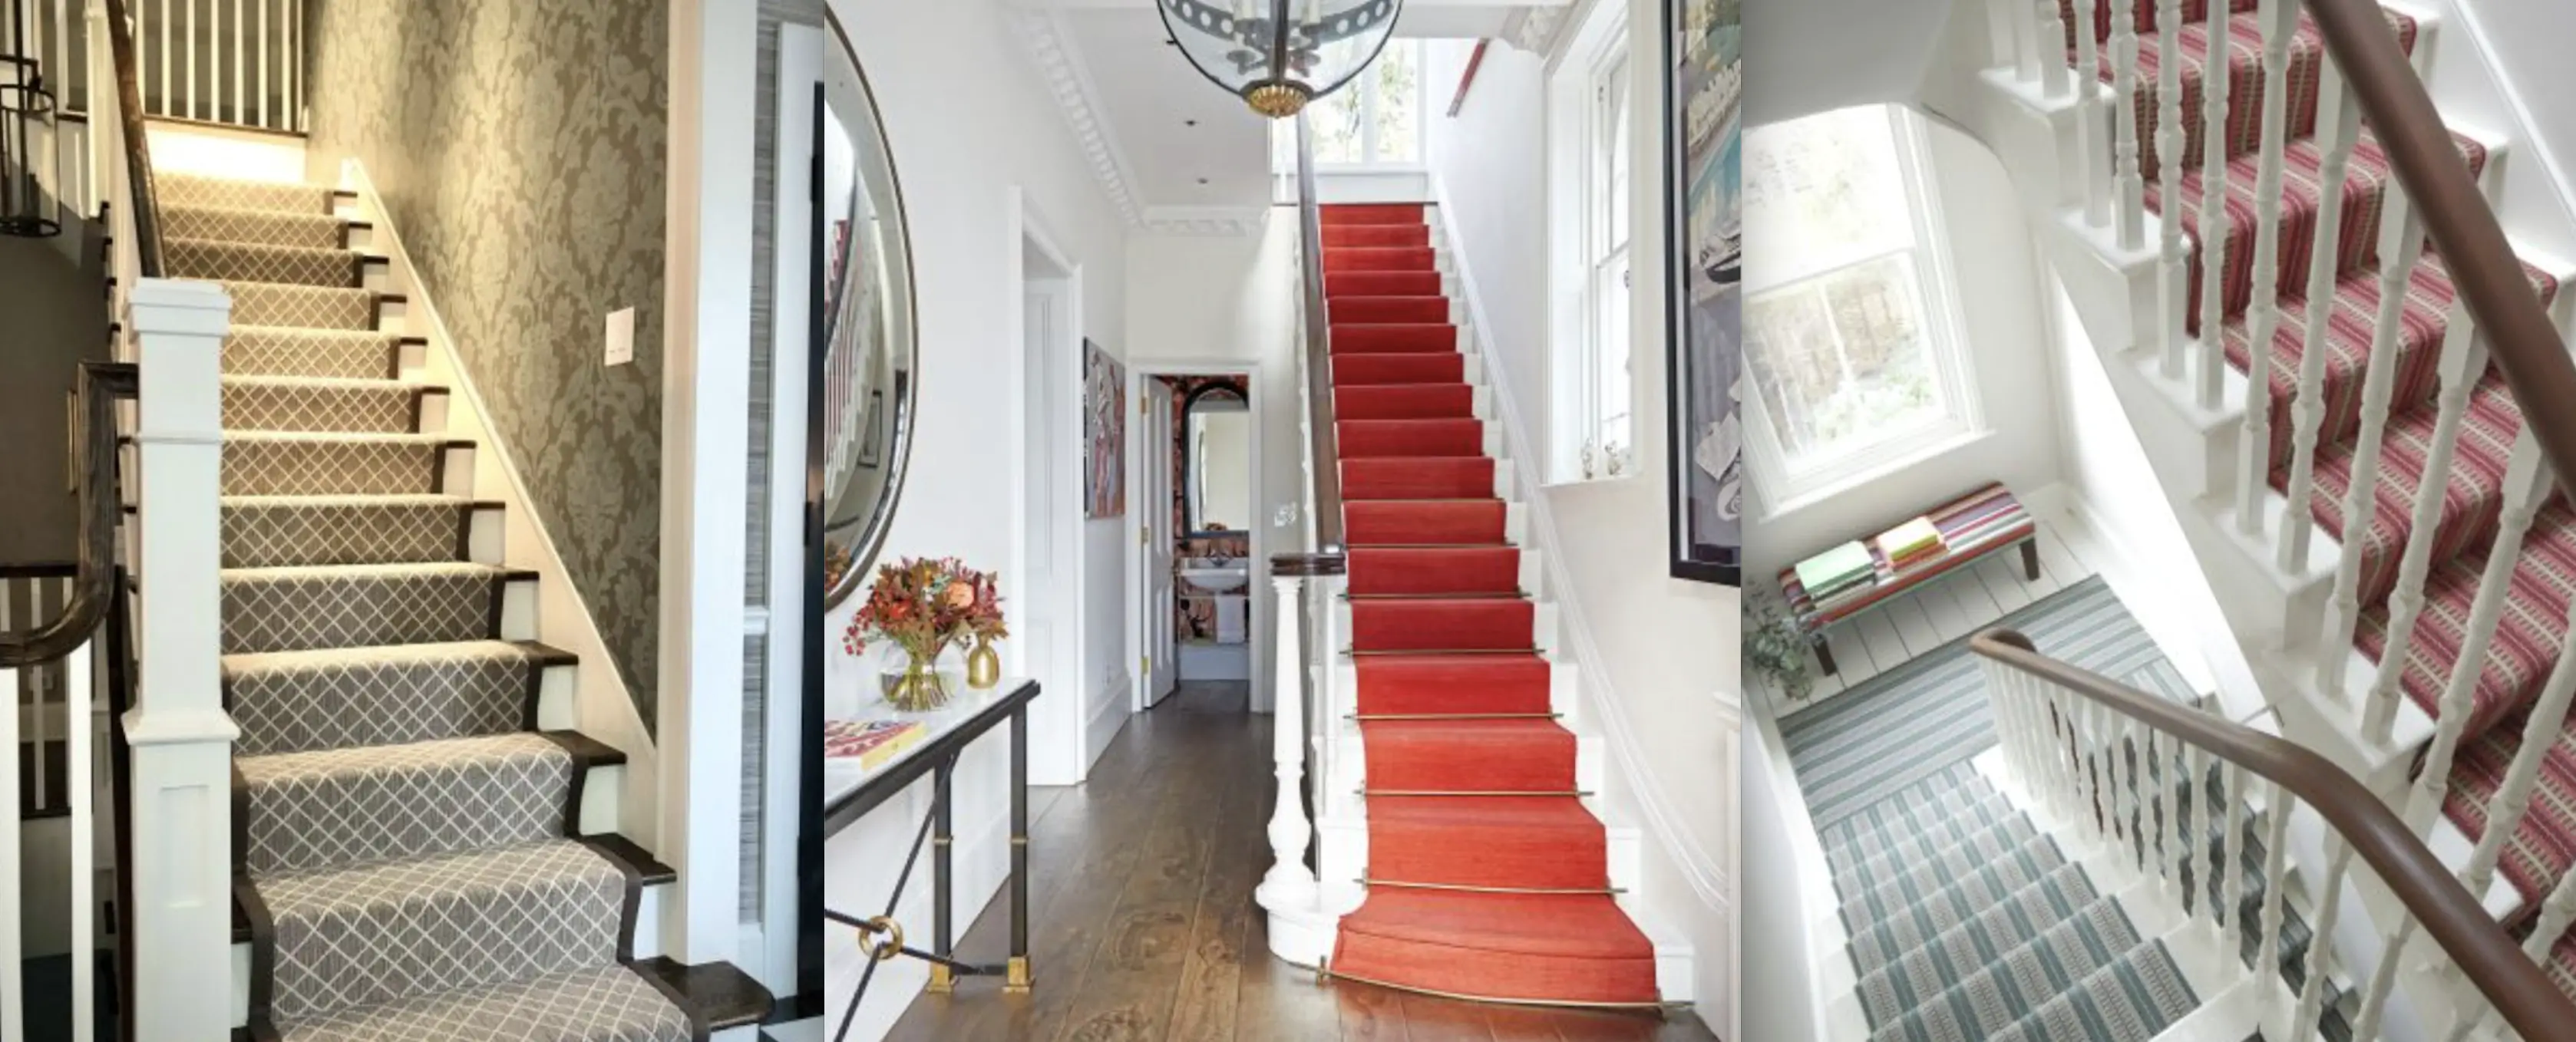 11 Exclusive Stair Carpet Runner Ideas: Turn Your Stairs into the Heaven’s Paradise